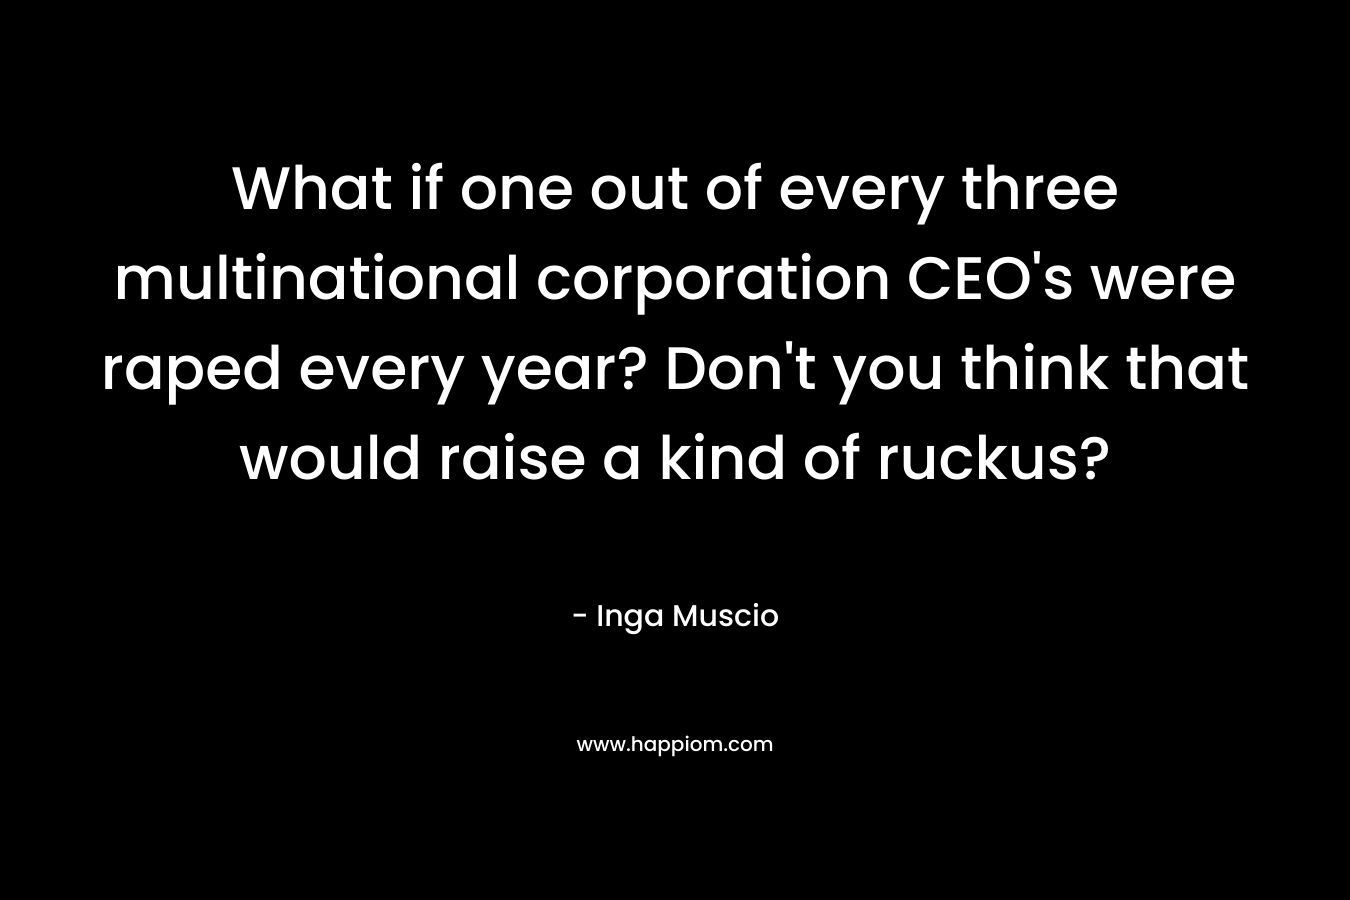 What if one out of every three multinational corporation CEO’s were raped every year? Don’t you think that would raise a kind of ruckus? – Inga Muscio